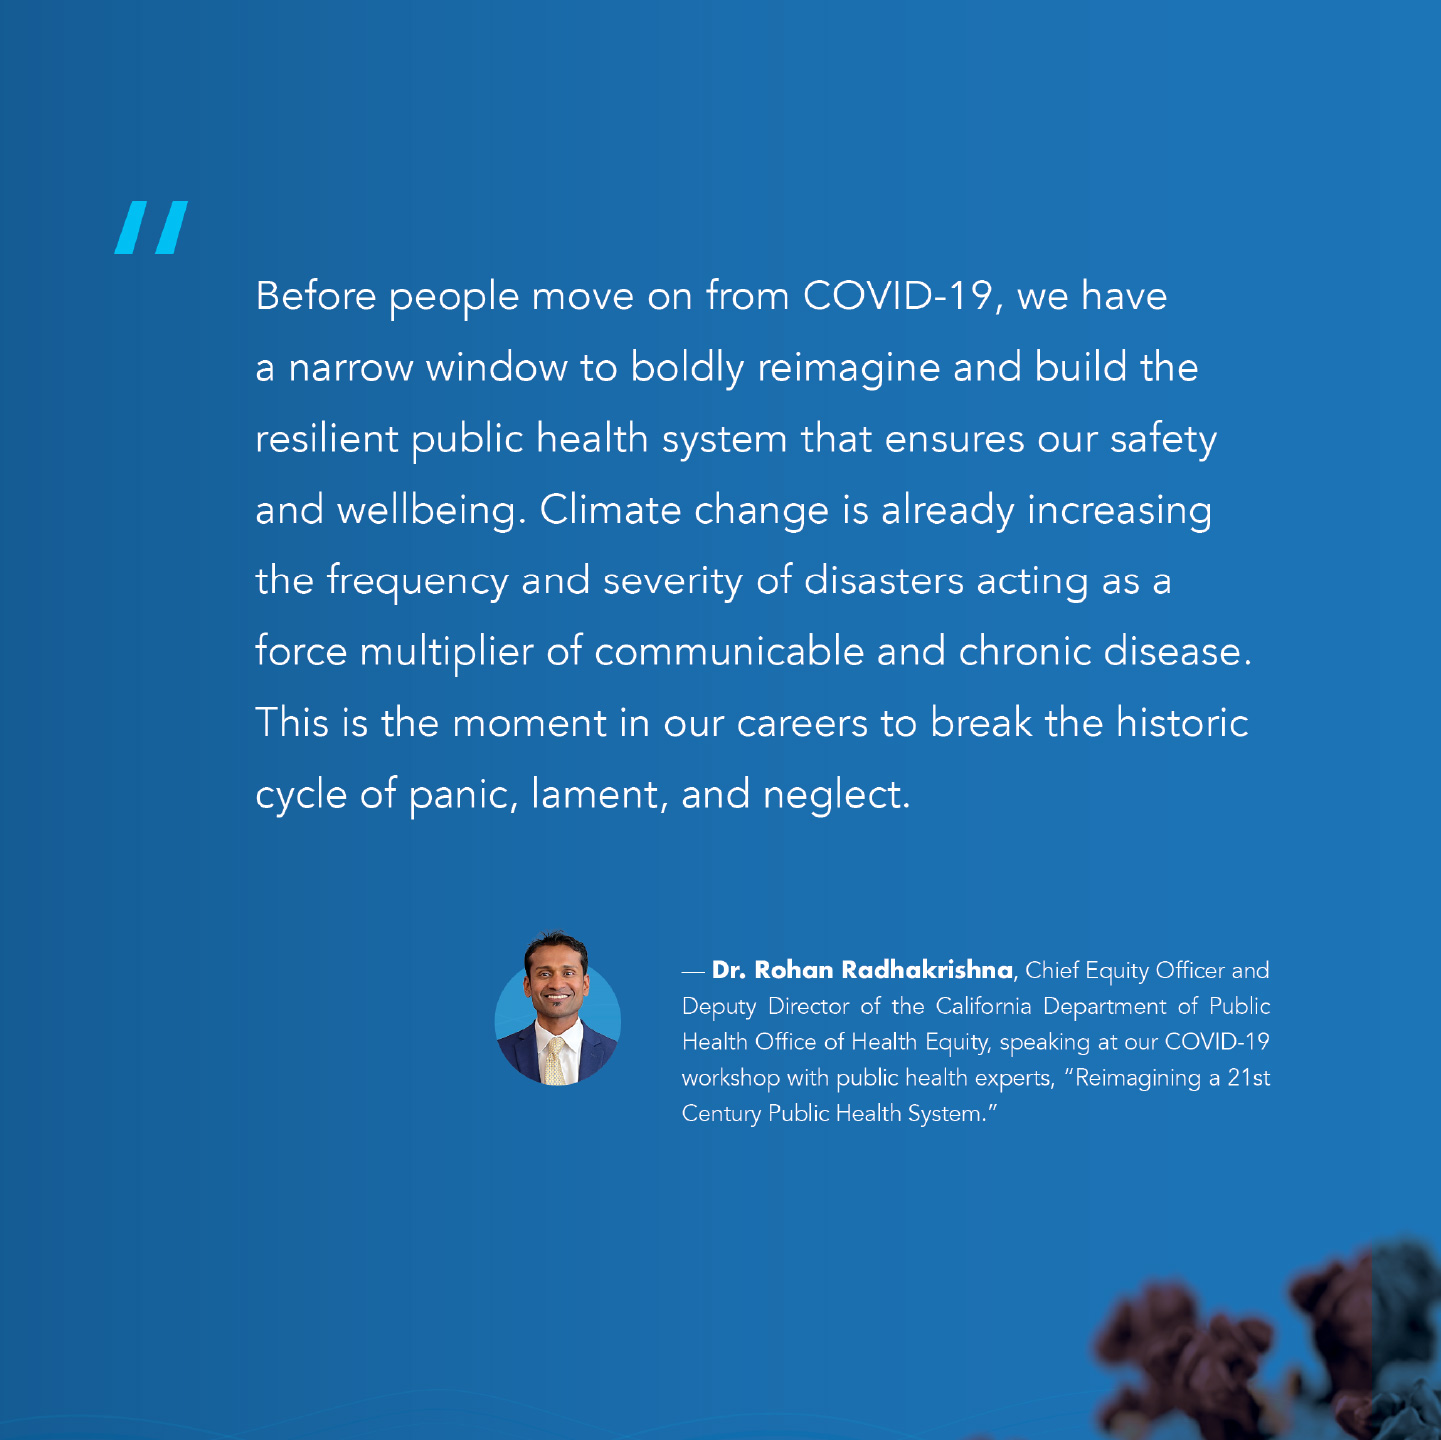 A quote in white text on a blue background with a headshot of the speaker and an illustration by the CDC of COVID-19.